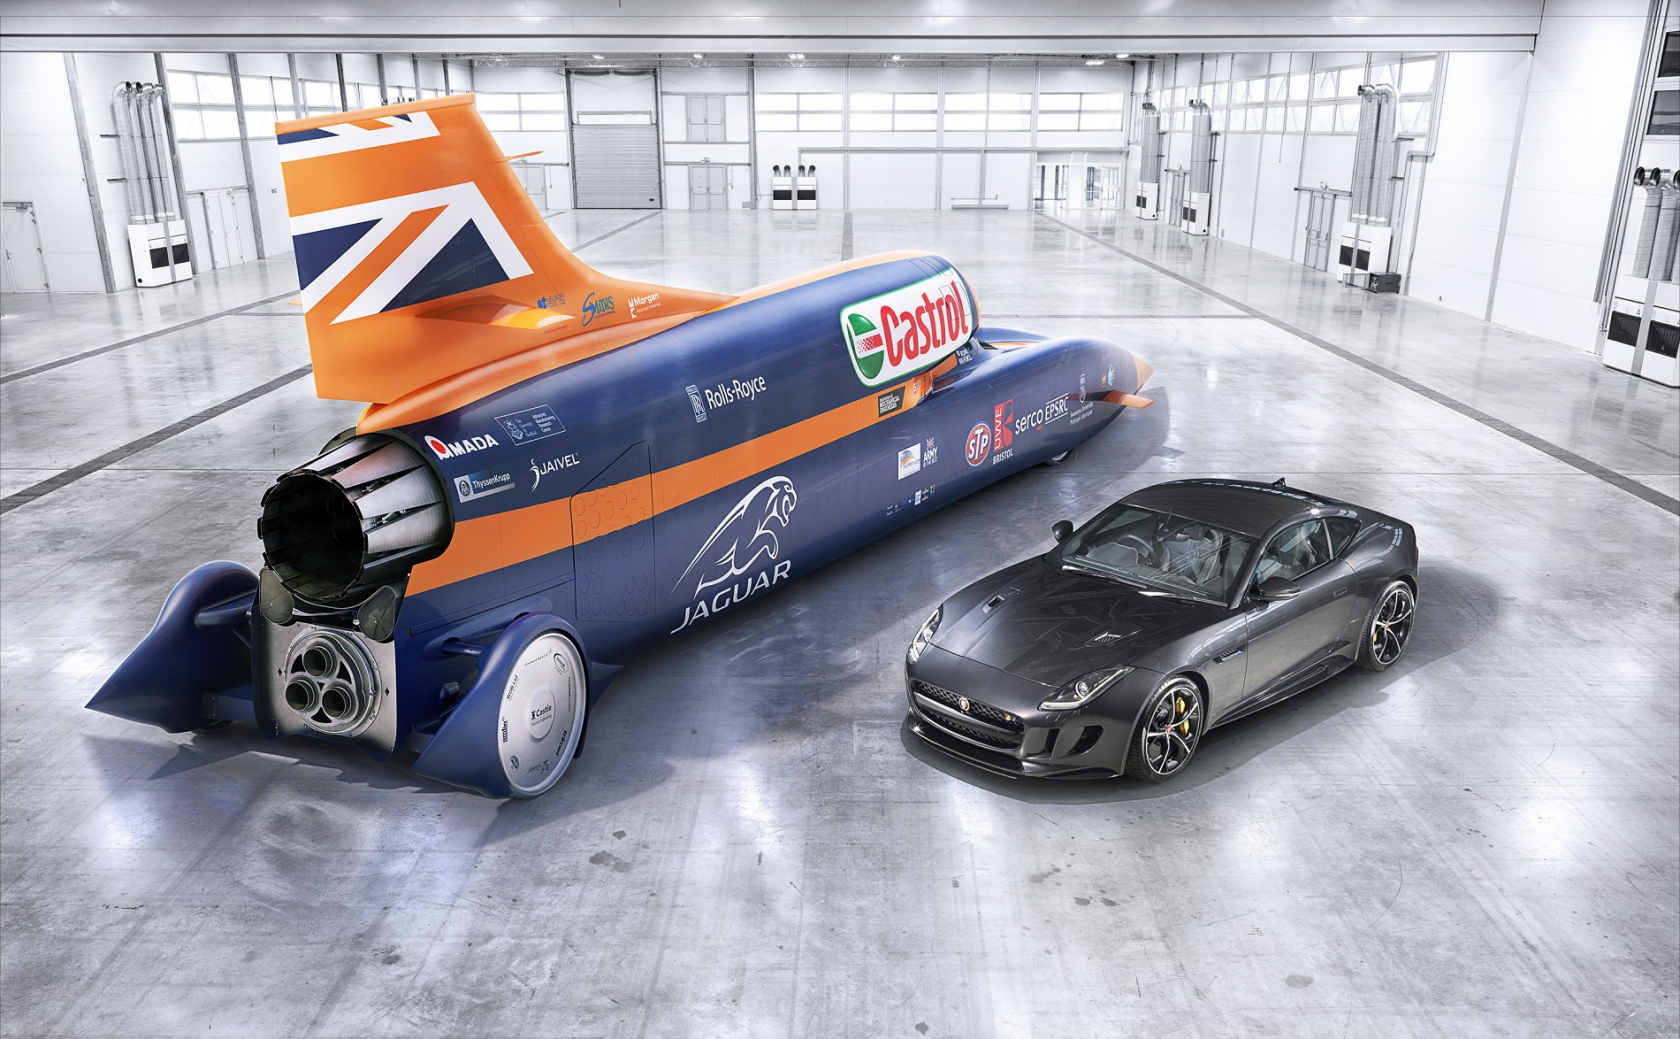 First public tests of the Bloodhound, a car designed to hit 1000mph, take place today